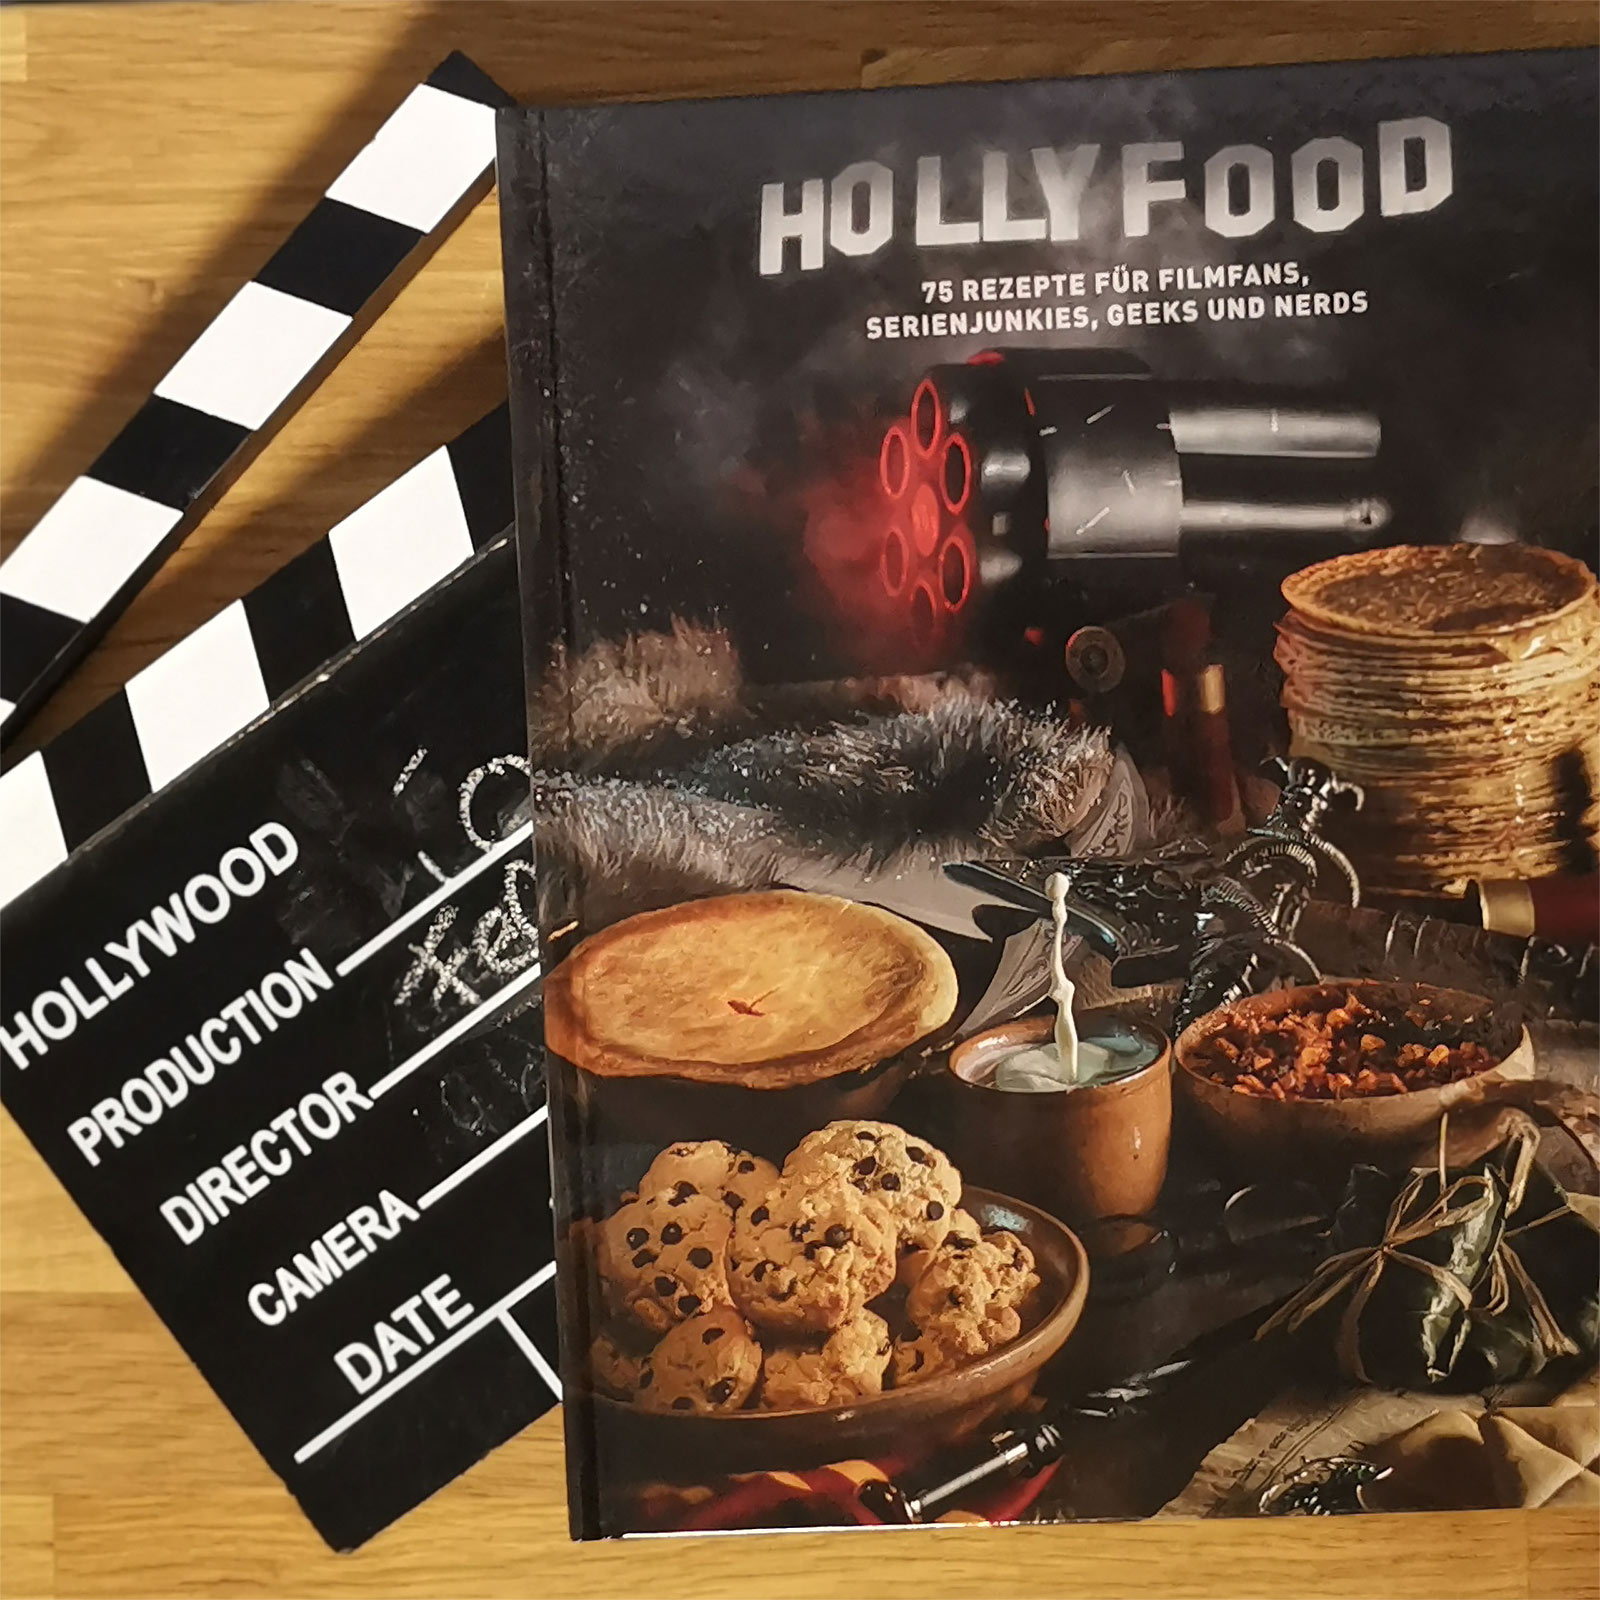 Hollyfood - Cookbook for movie fans, series junkies, geeks and nerds